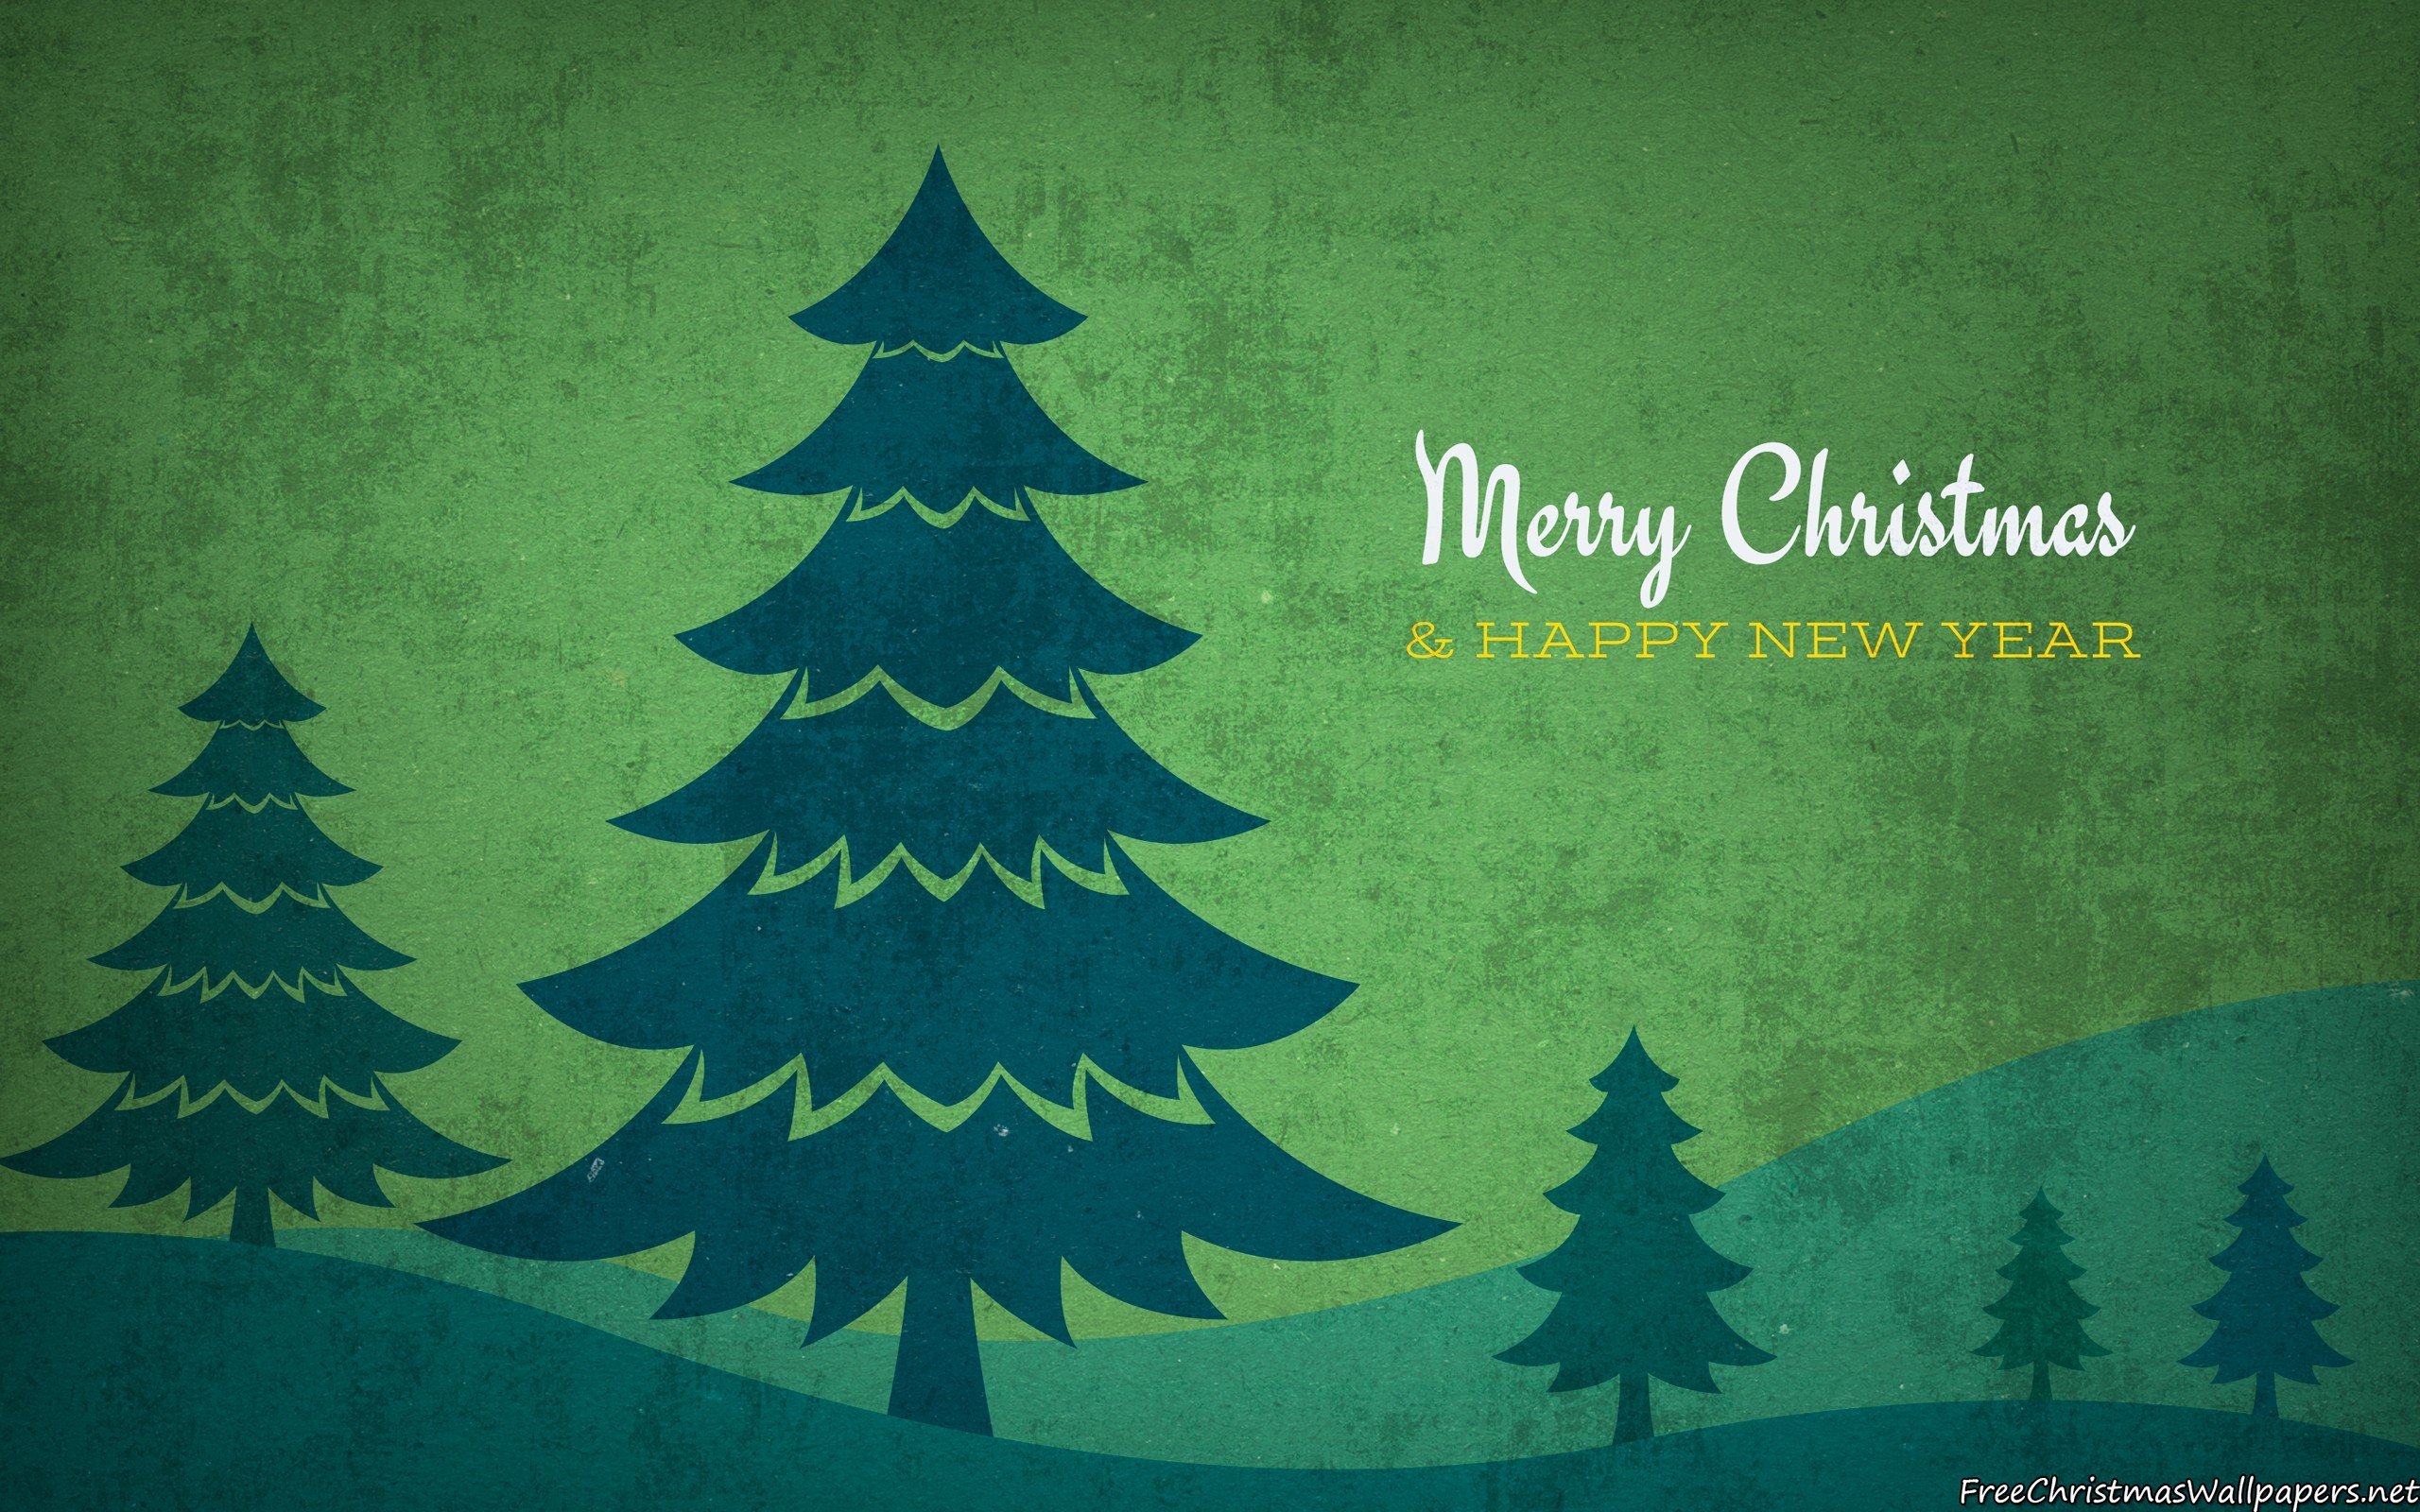 Christmas Wallpaper - Vintage Christmas Tree Background , HD Wallpaper & Backgrounds